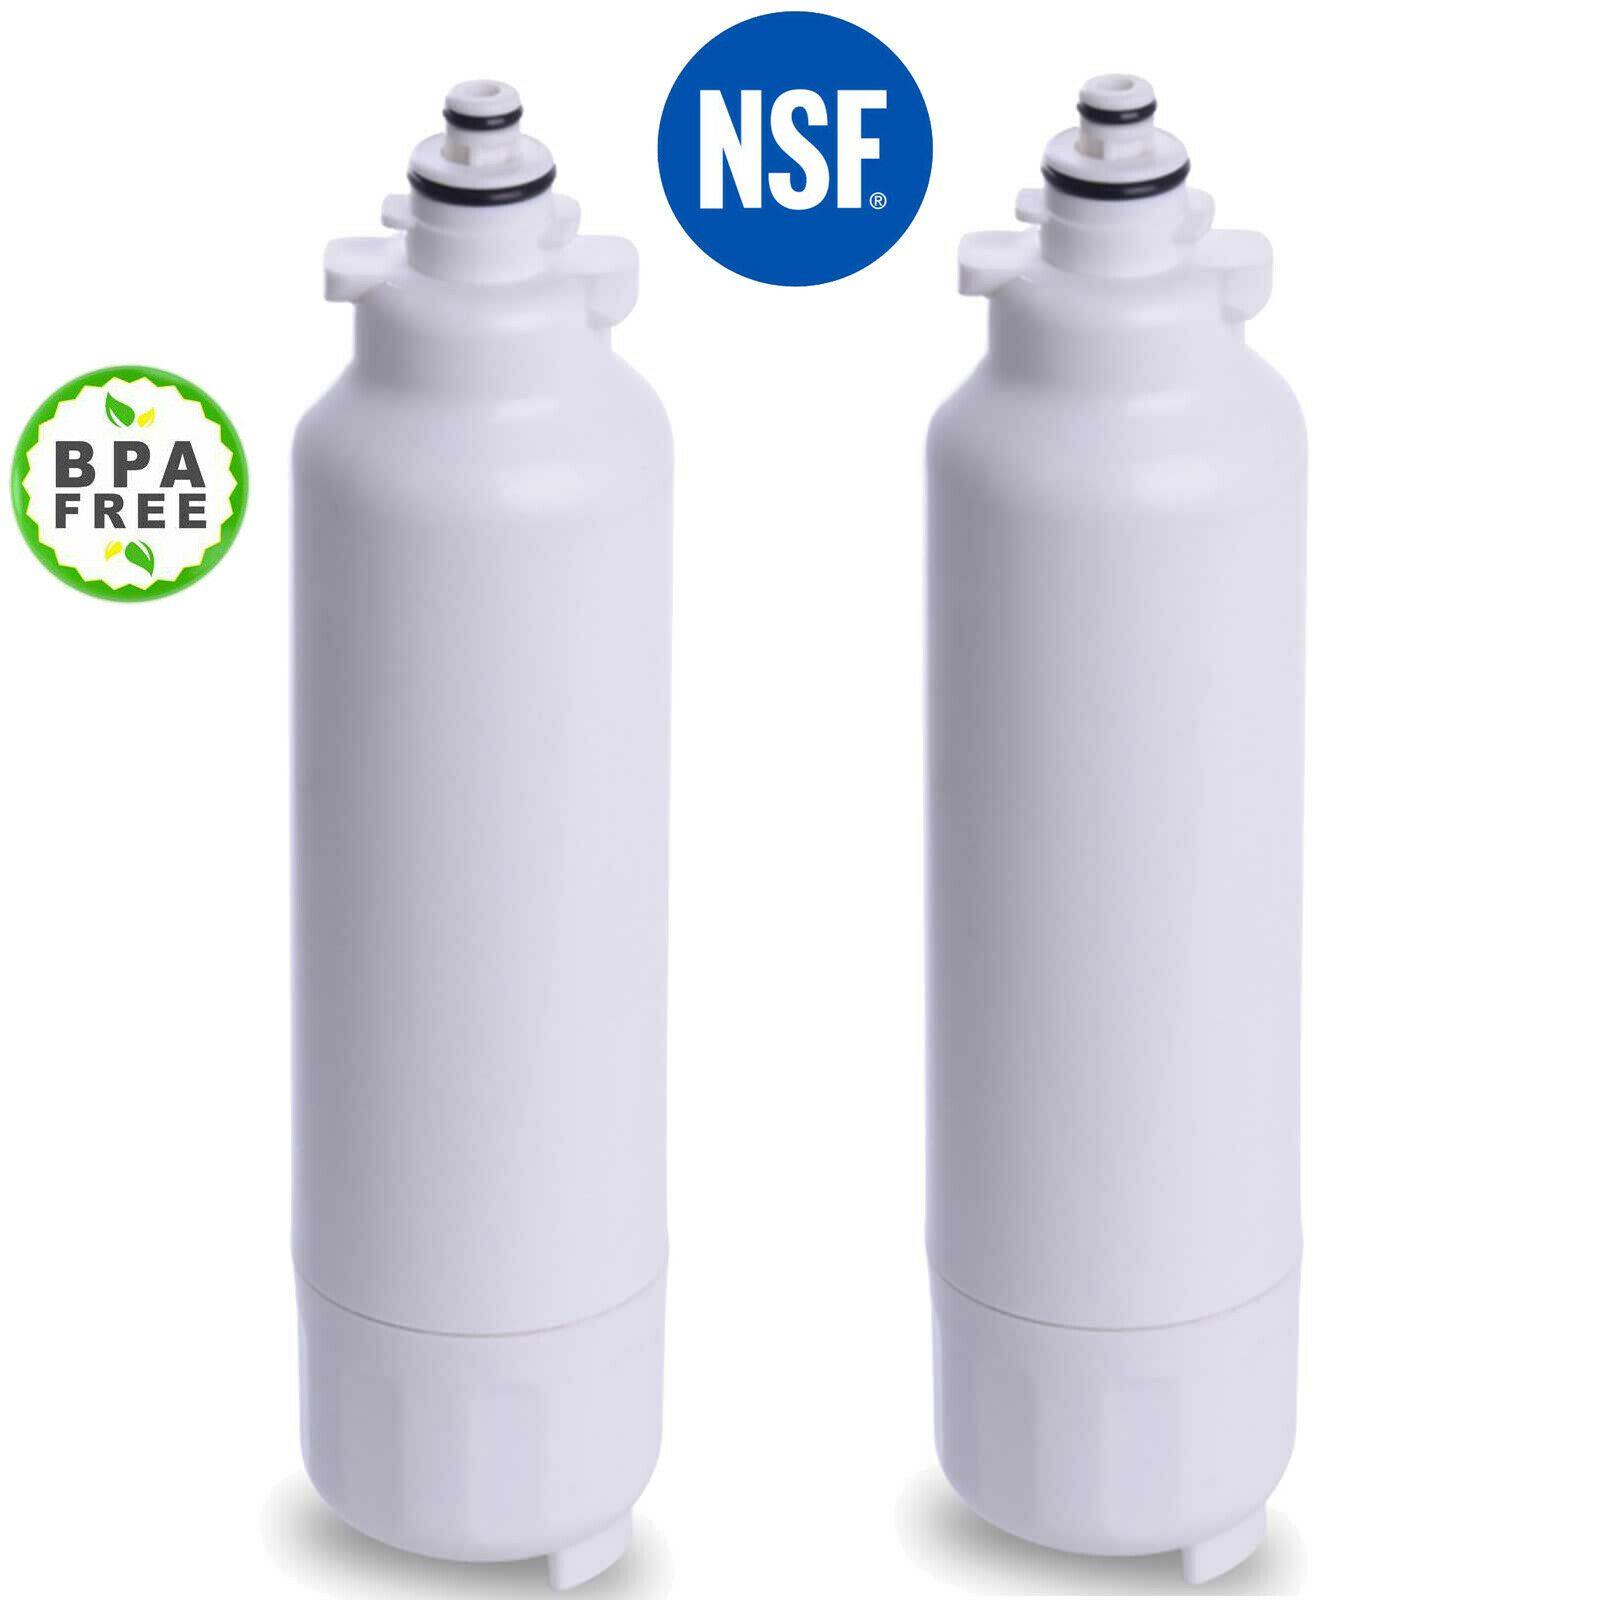 Fridge Water Filter Compatible For LG LT800P, LMXS30776S, LSC22991ST, LMXS30746S Sparesbarn